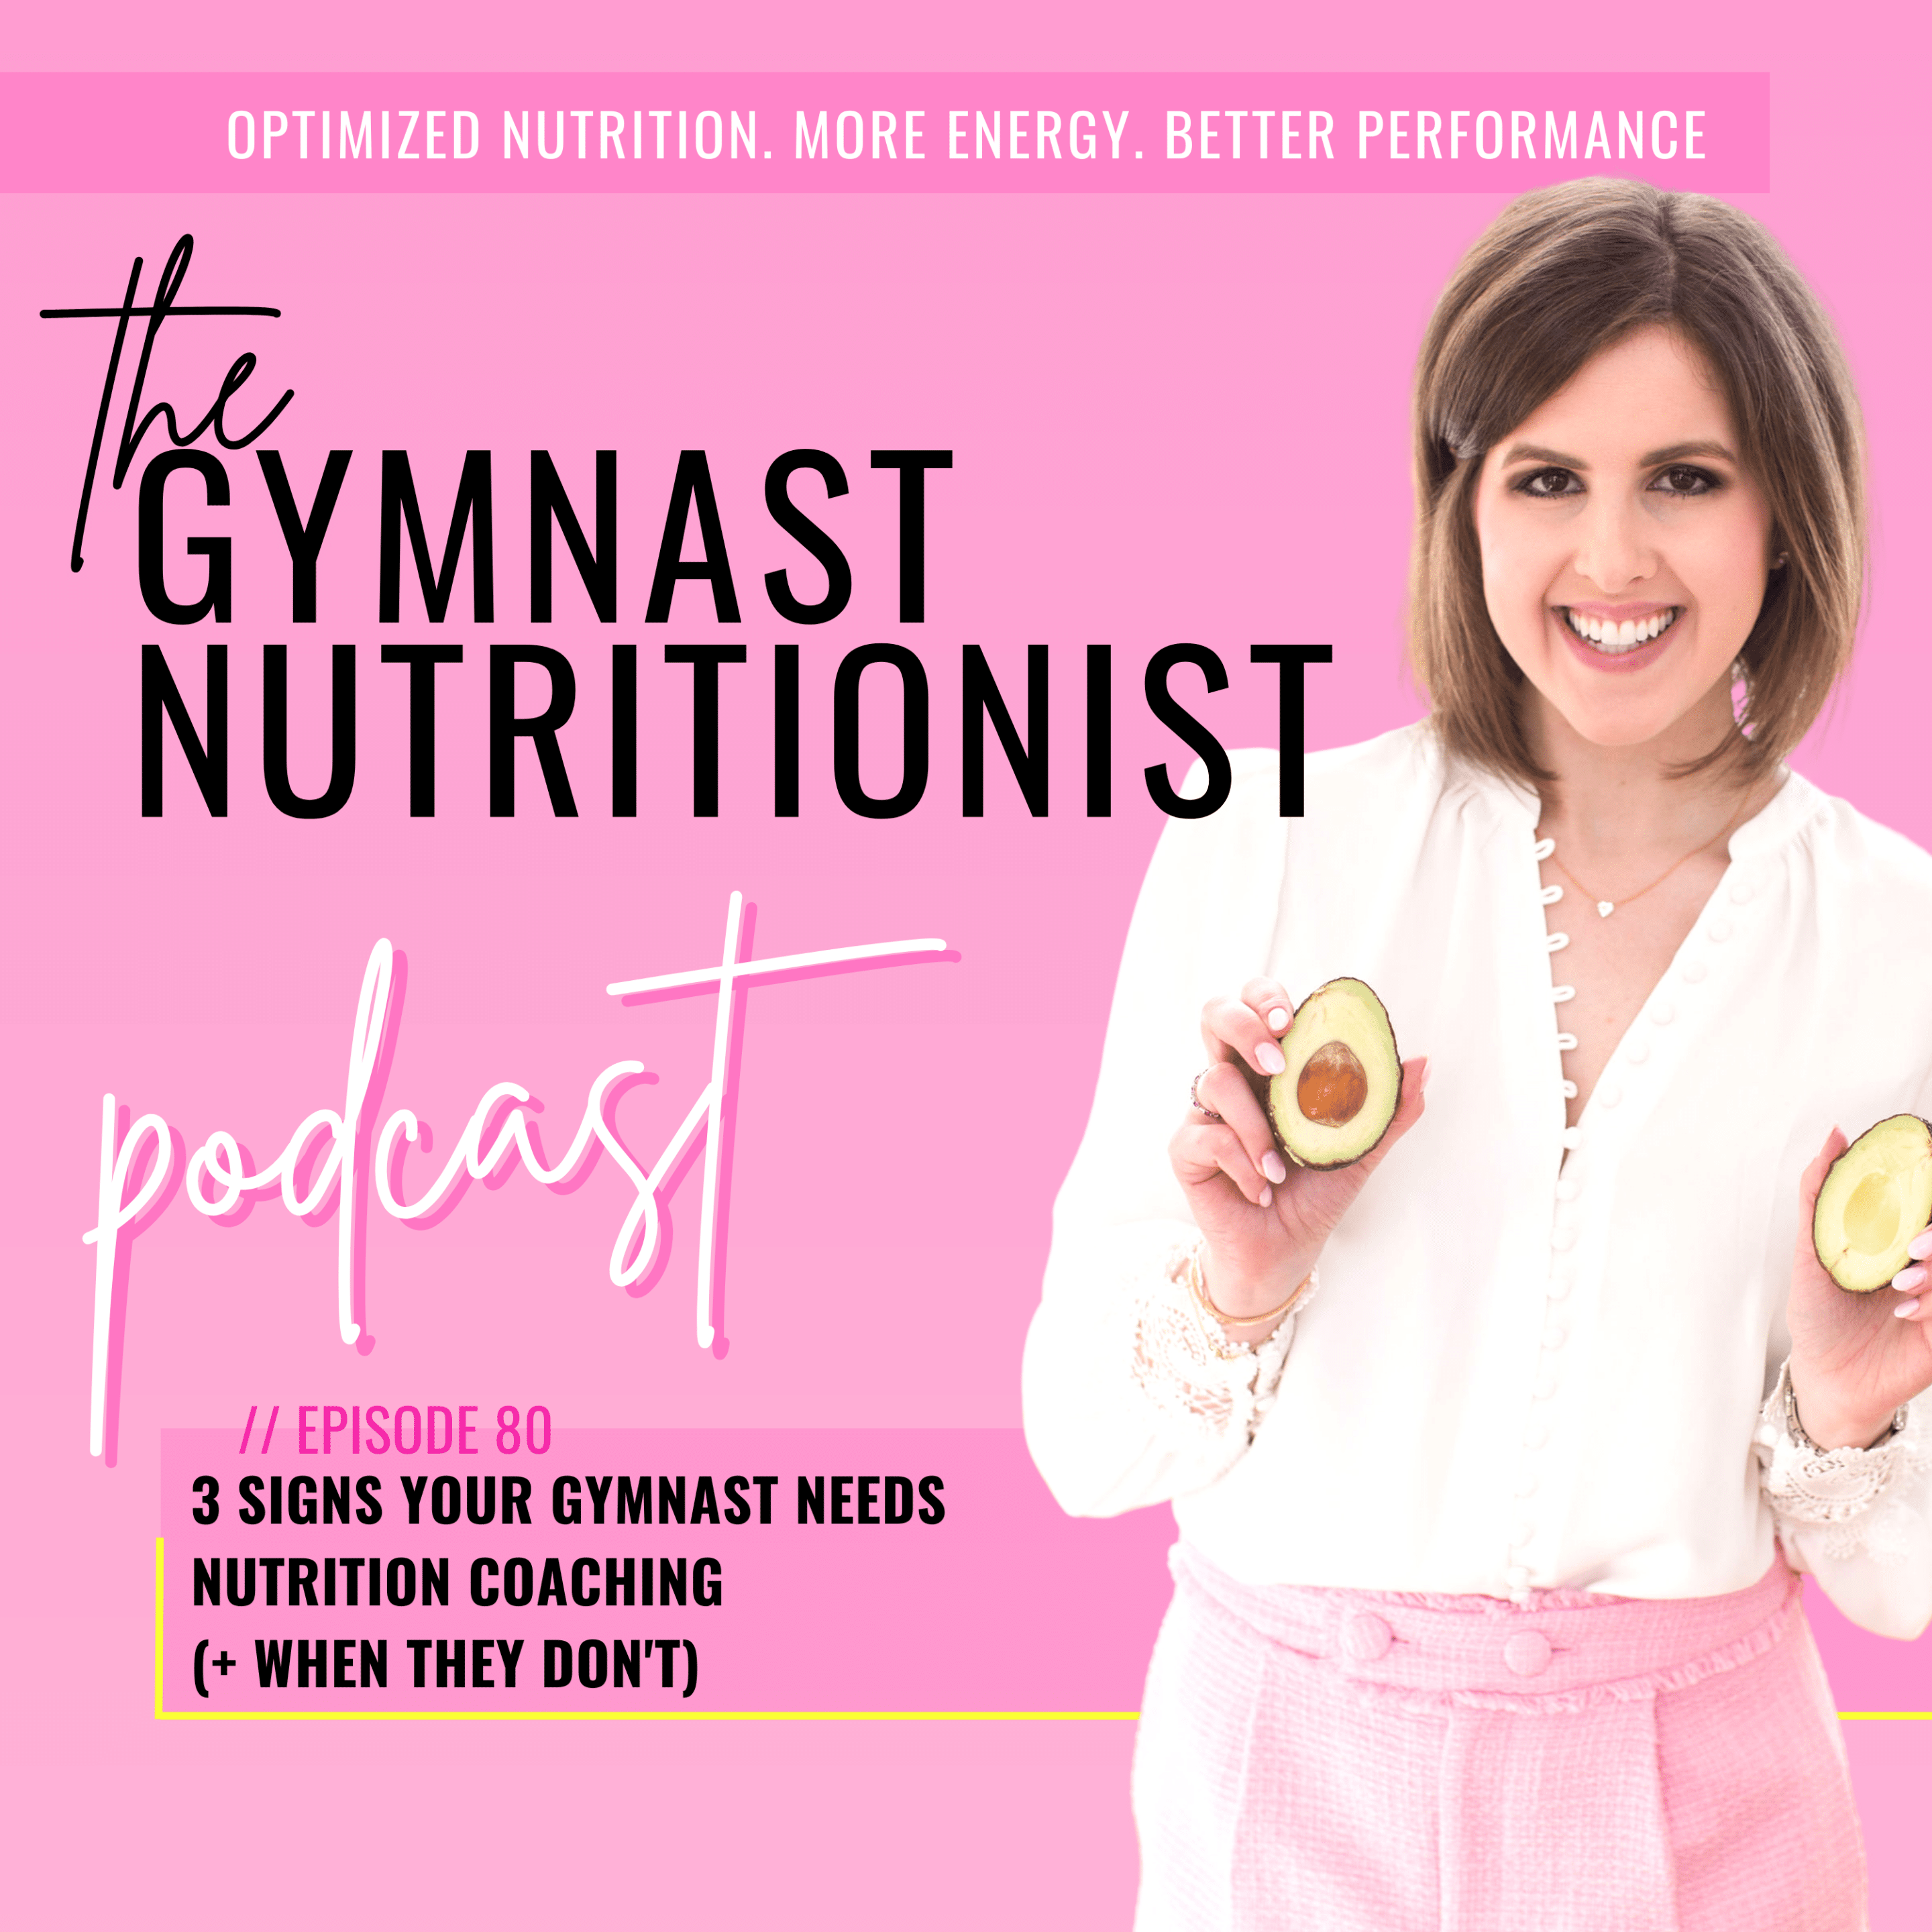 Episode 80: 3 Signs Your Gymnast Needs Nutrition Coaching (+ when they don't)